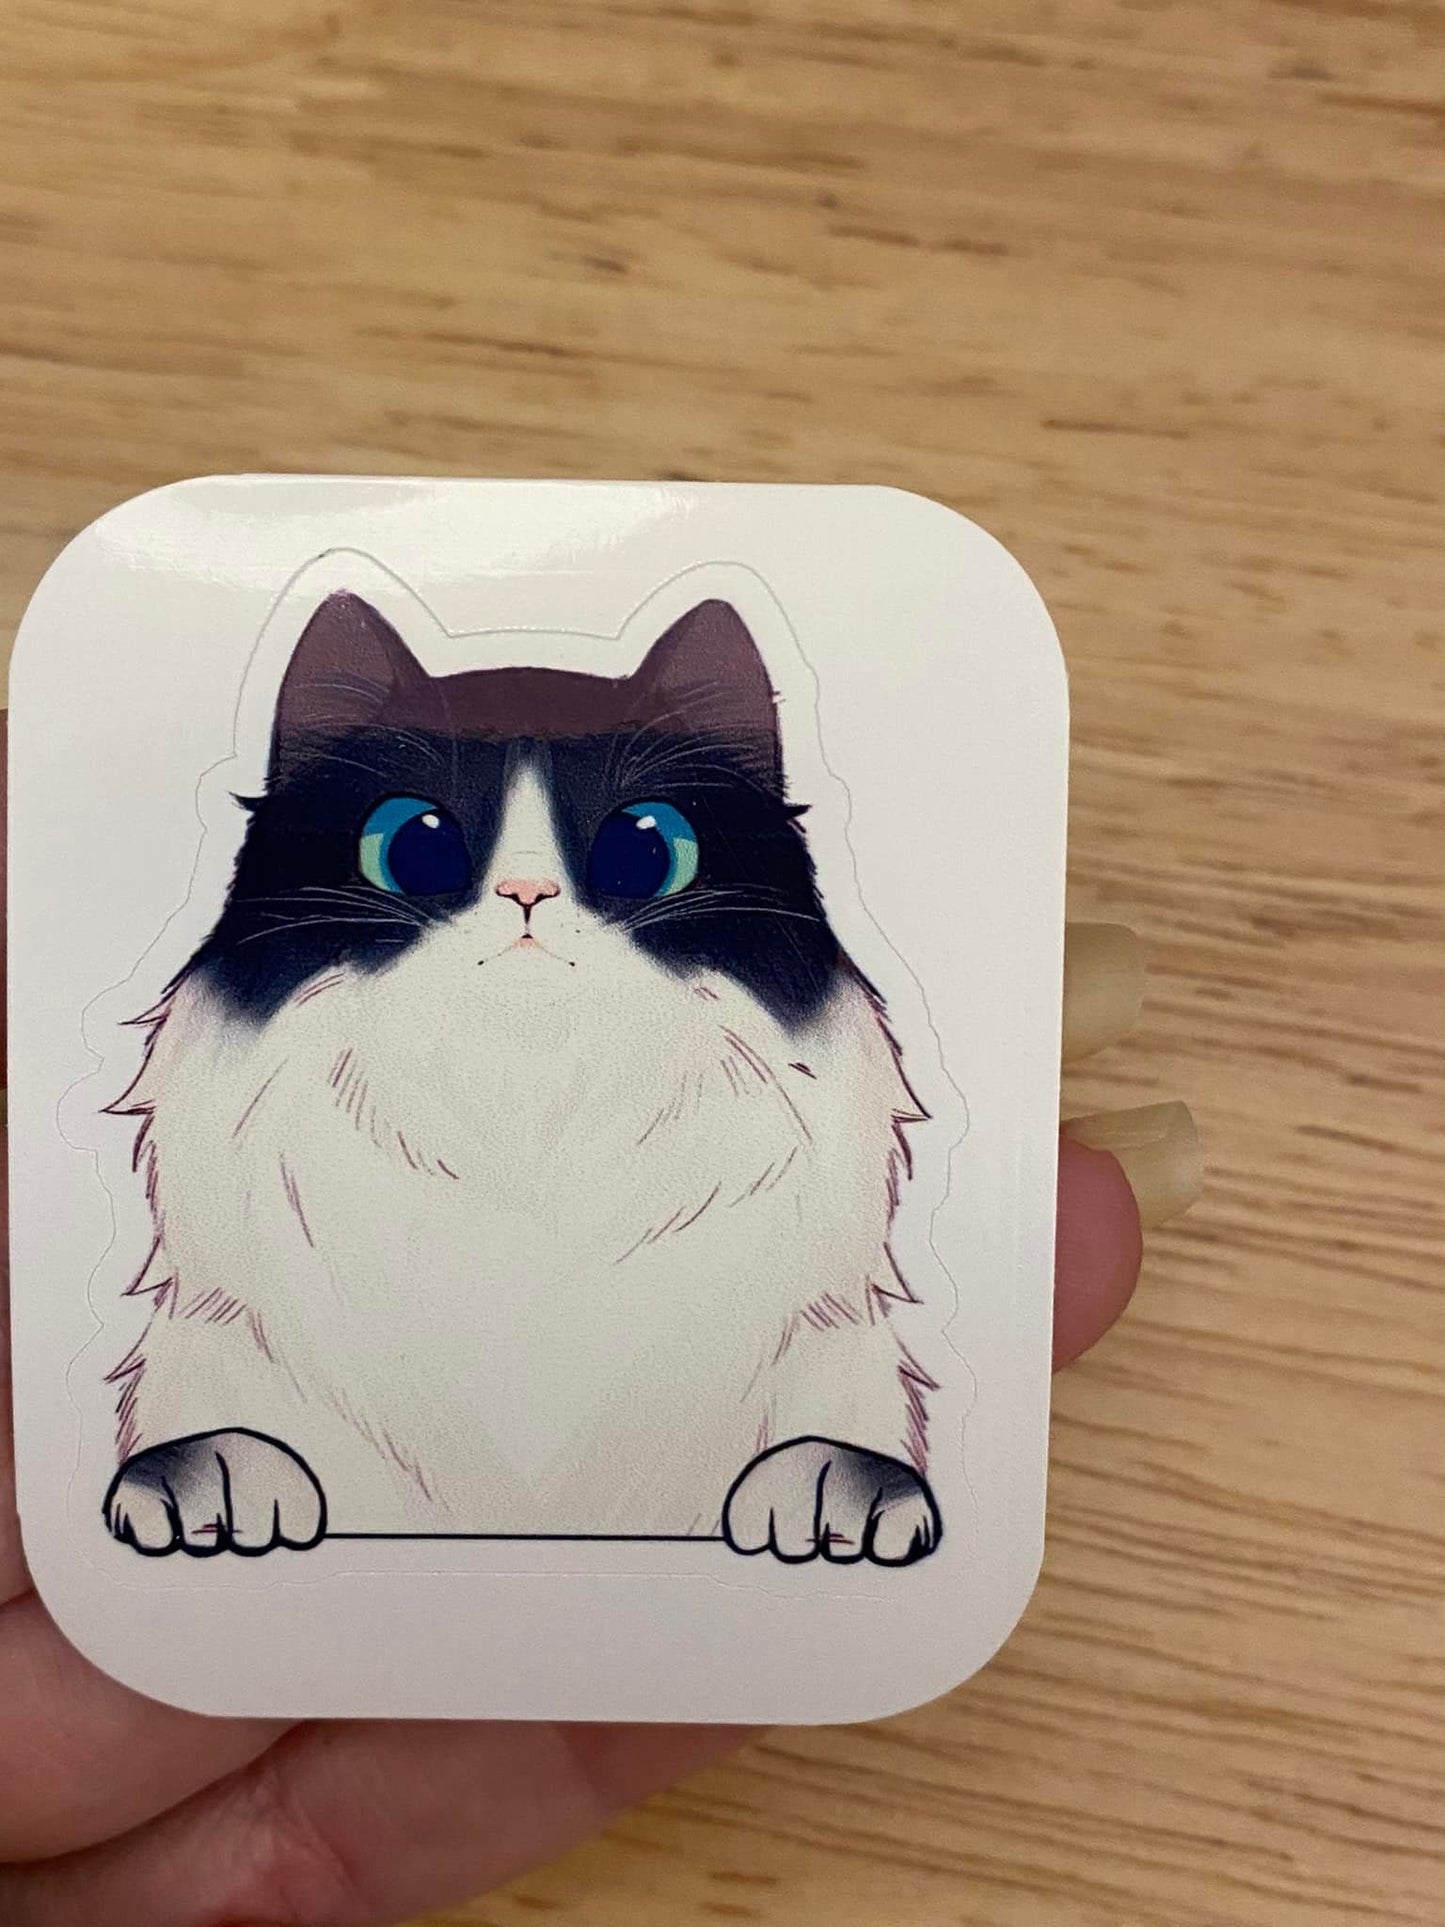 Fluffy White and Black Cat STICKER, White Black Head Cat Sticker, Halographic option,  Cat Decal option